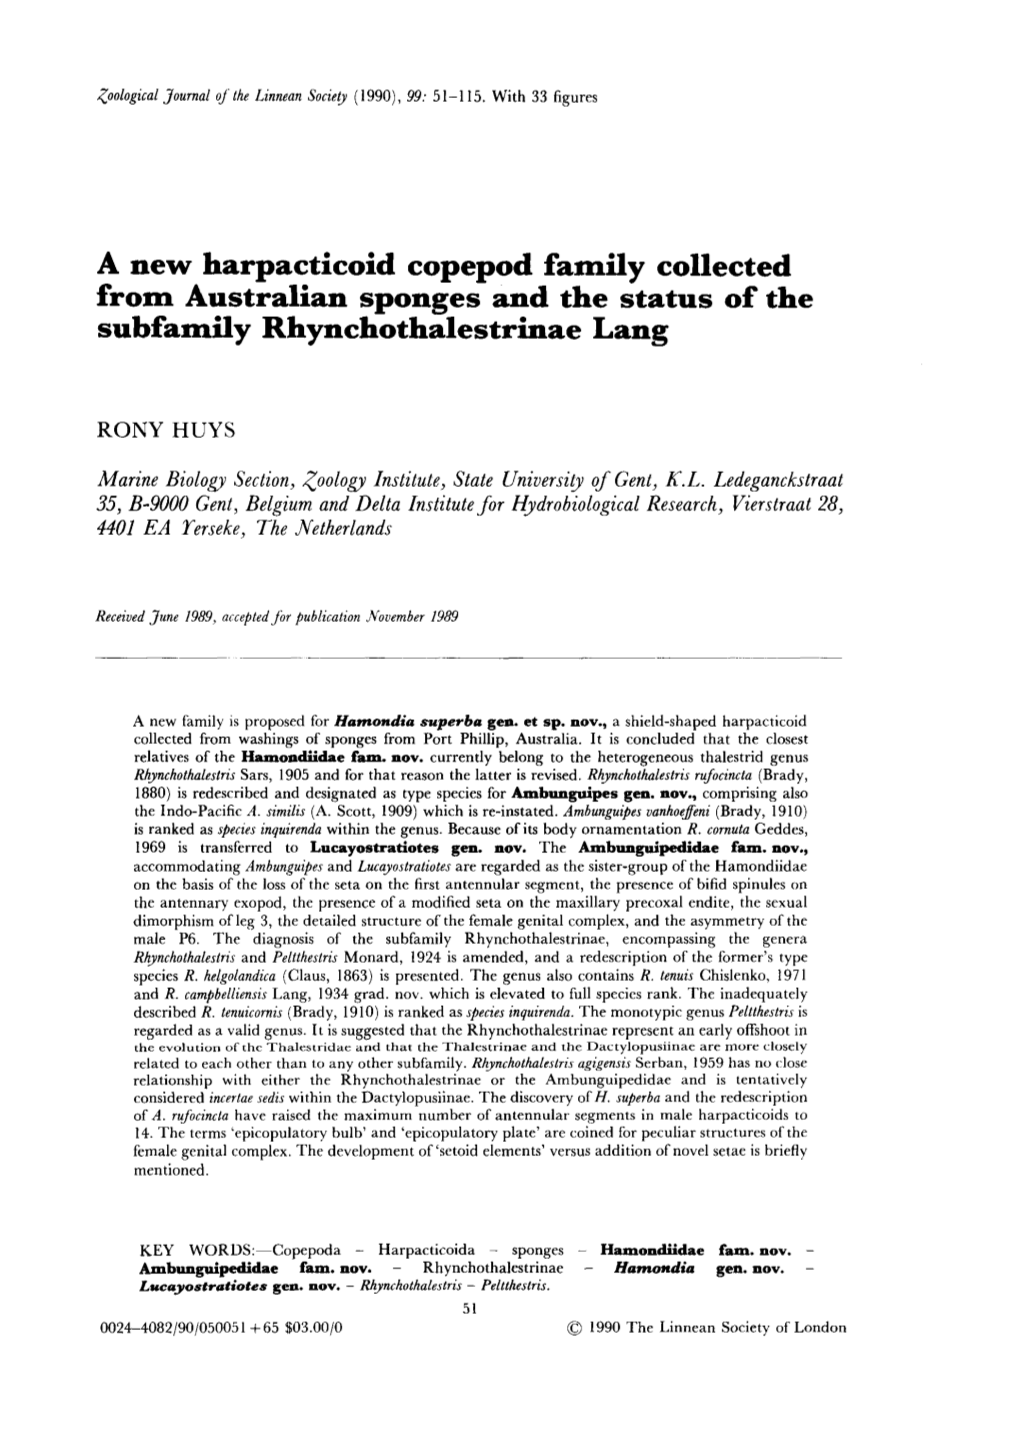 A New Harpacticoid Copepod Family Collected from Australian Sponges and the Status of the Subfamily Rhynchothalestrinae Lang